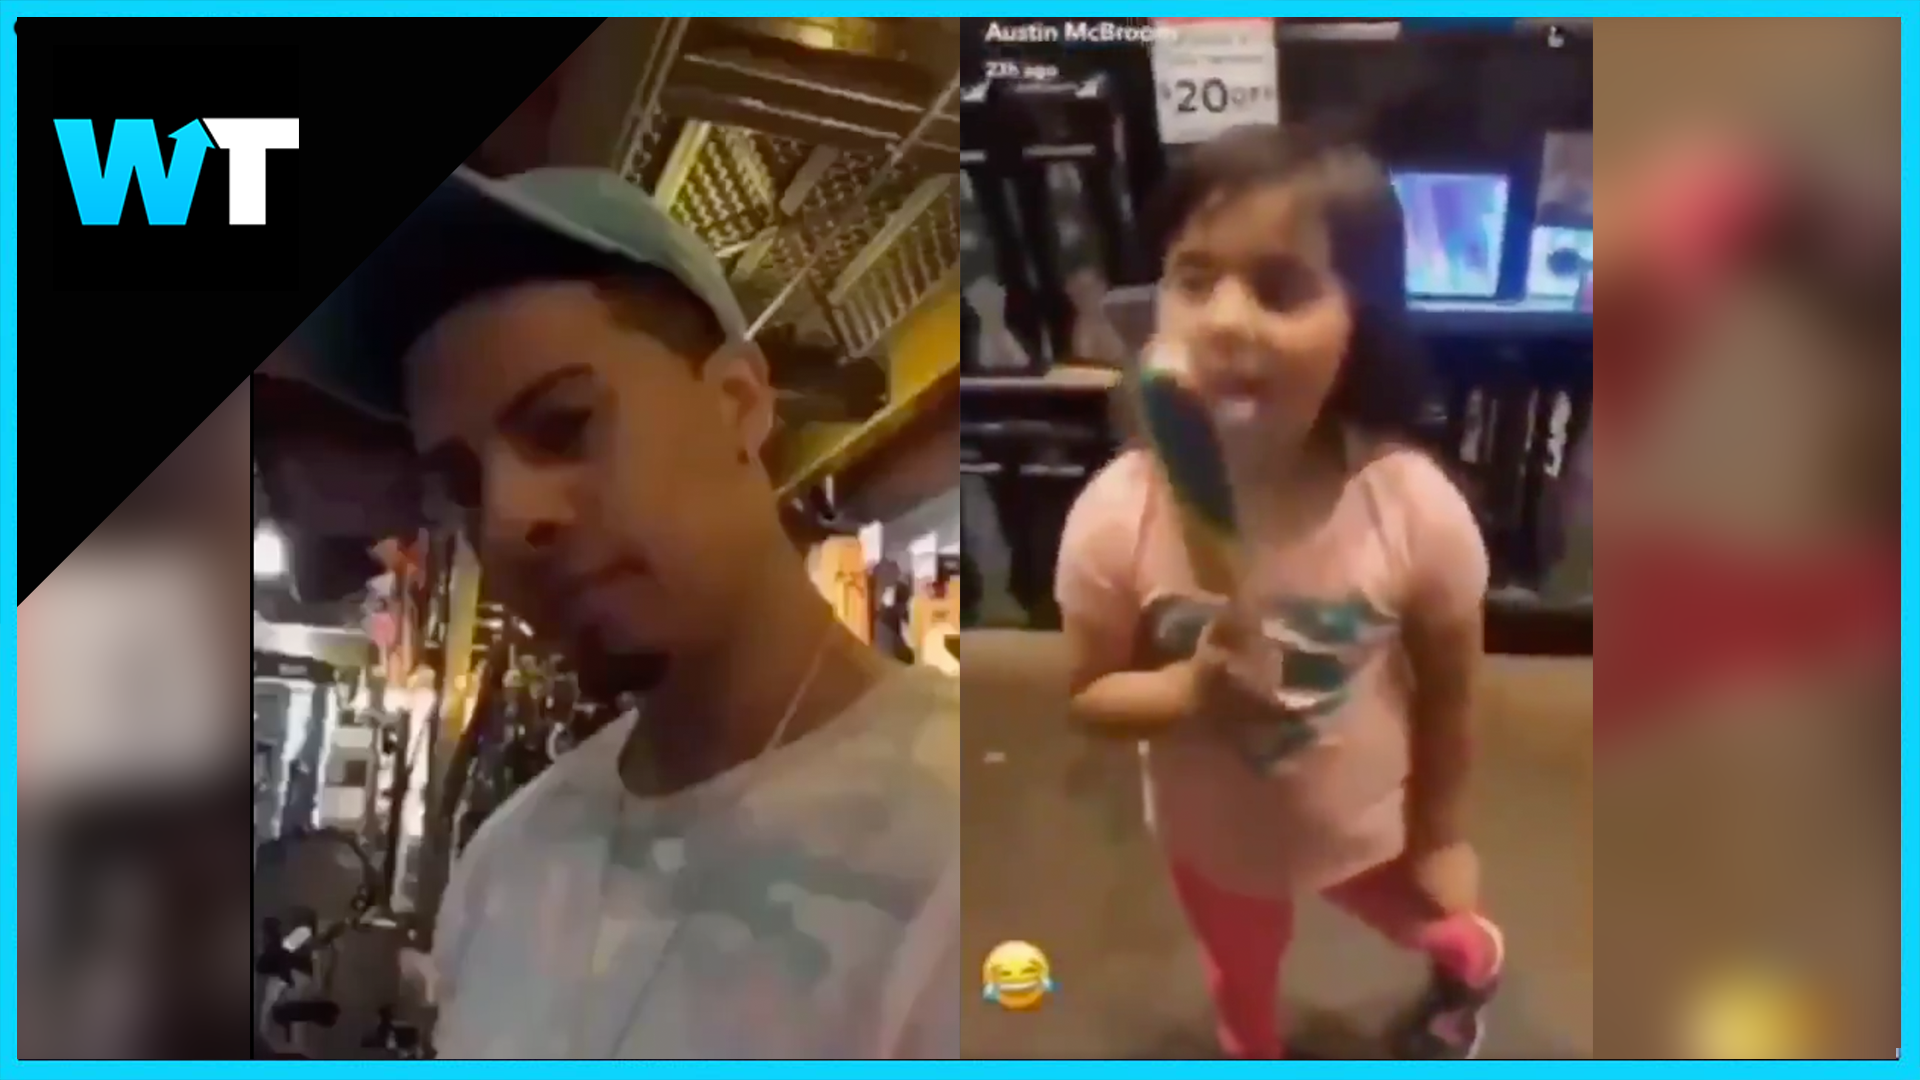 What's Trending - YouTube’s ACE Family Dad @AustinMcBroom is catching some heat for buying this toddler a penis-shaped lollipop and laughing as she plays with it 